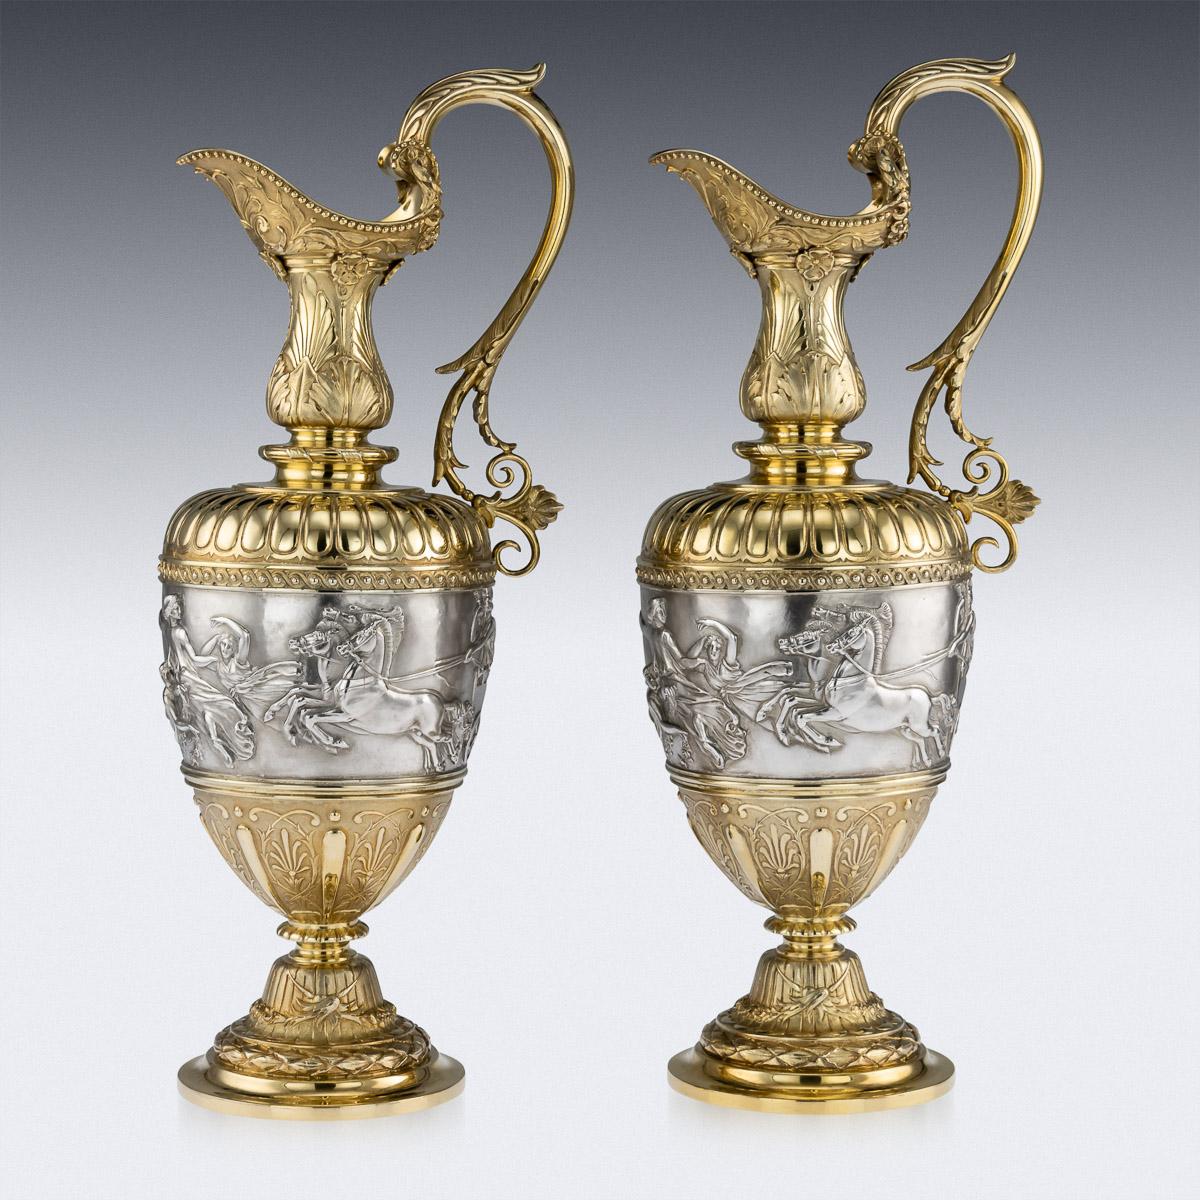 English Victorian Silver-Gilt Pair of Wine Ewers by Elkington & Co, circa 1878